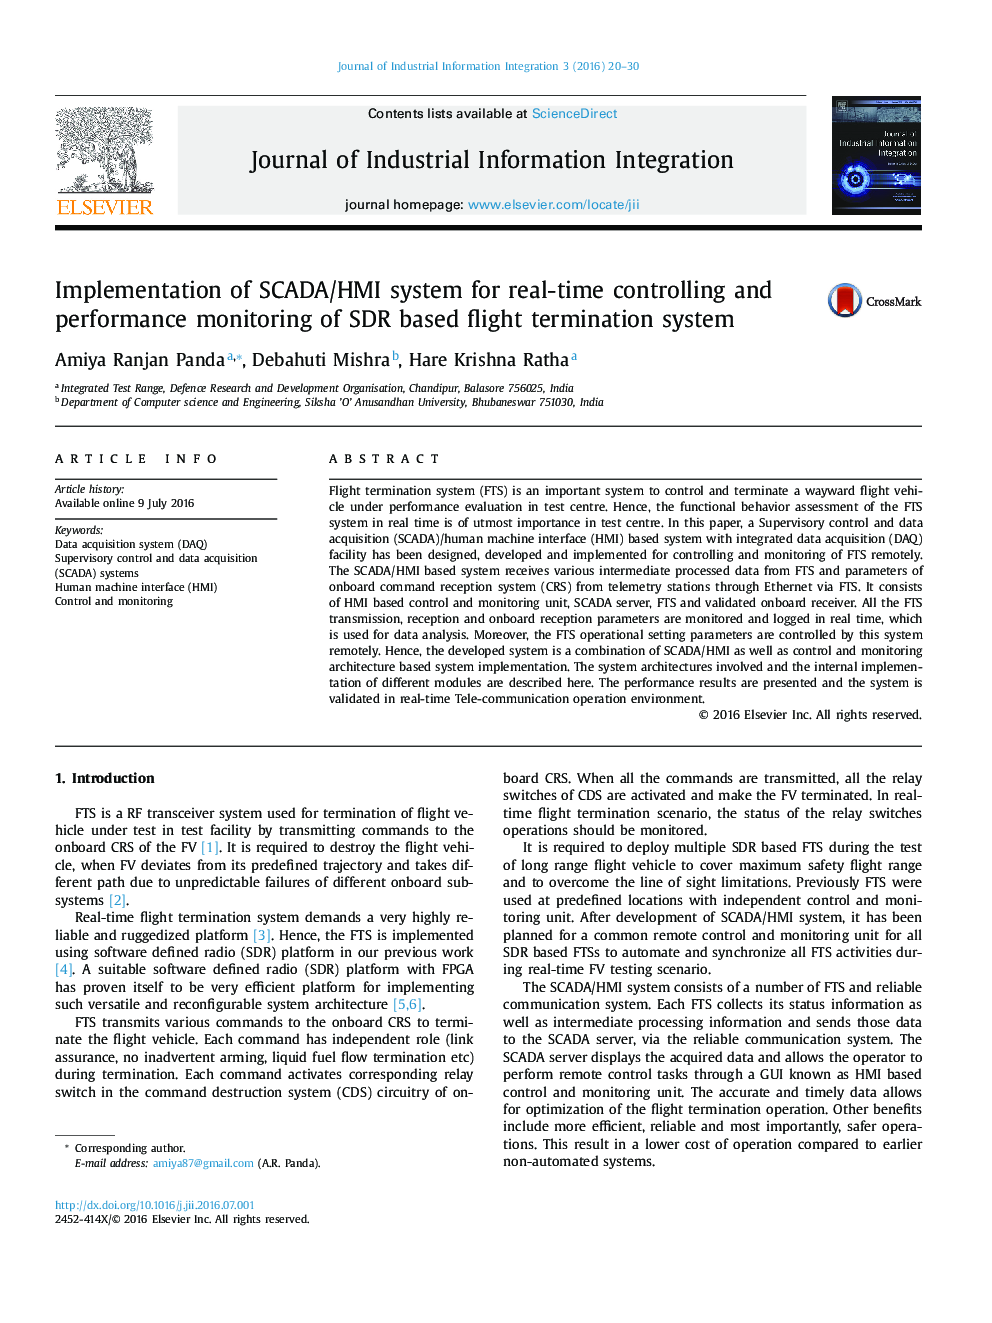 Implementation of SCADA/HMI system for real-time controlling and performance monitoring of SDR based flight termination system